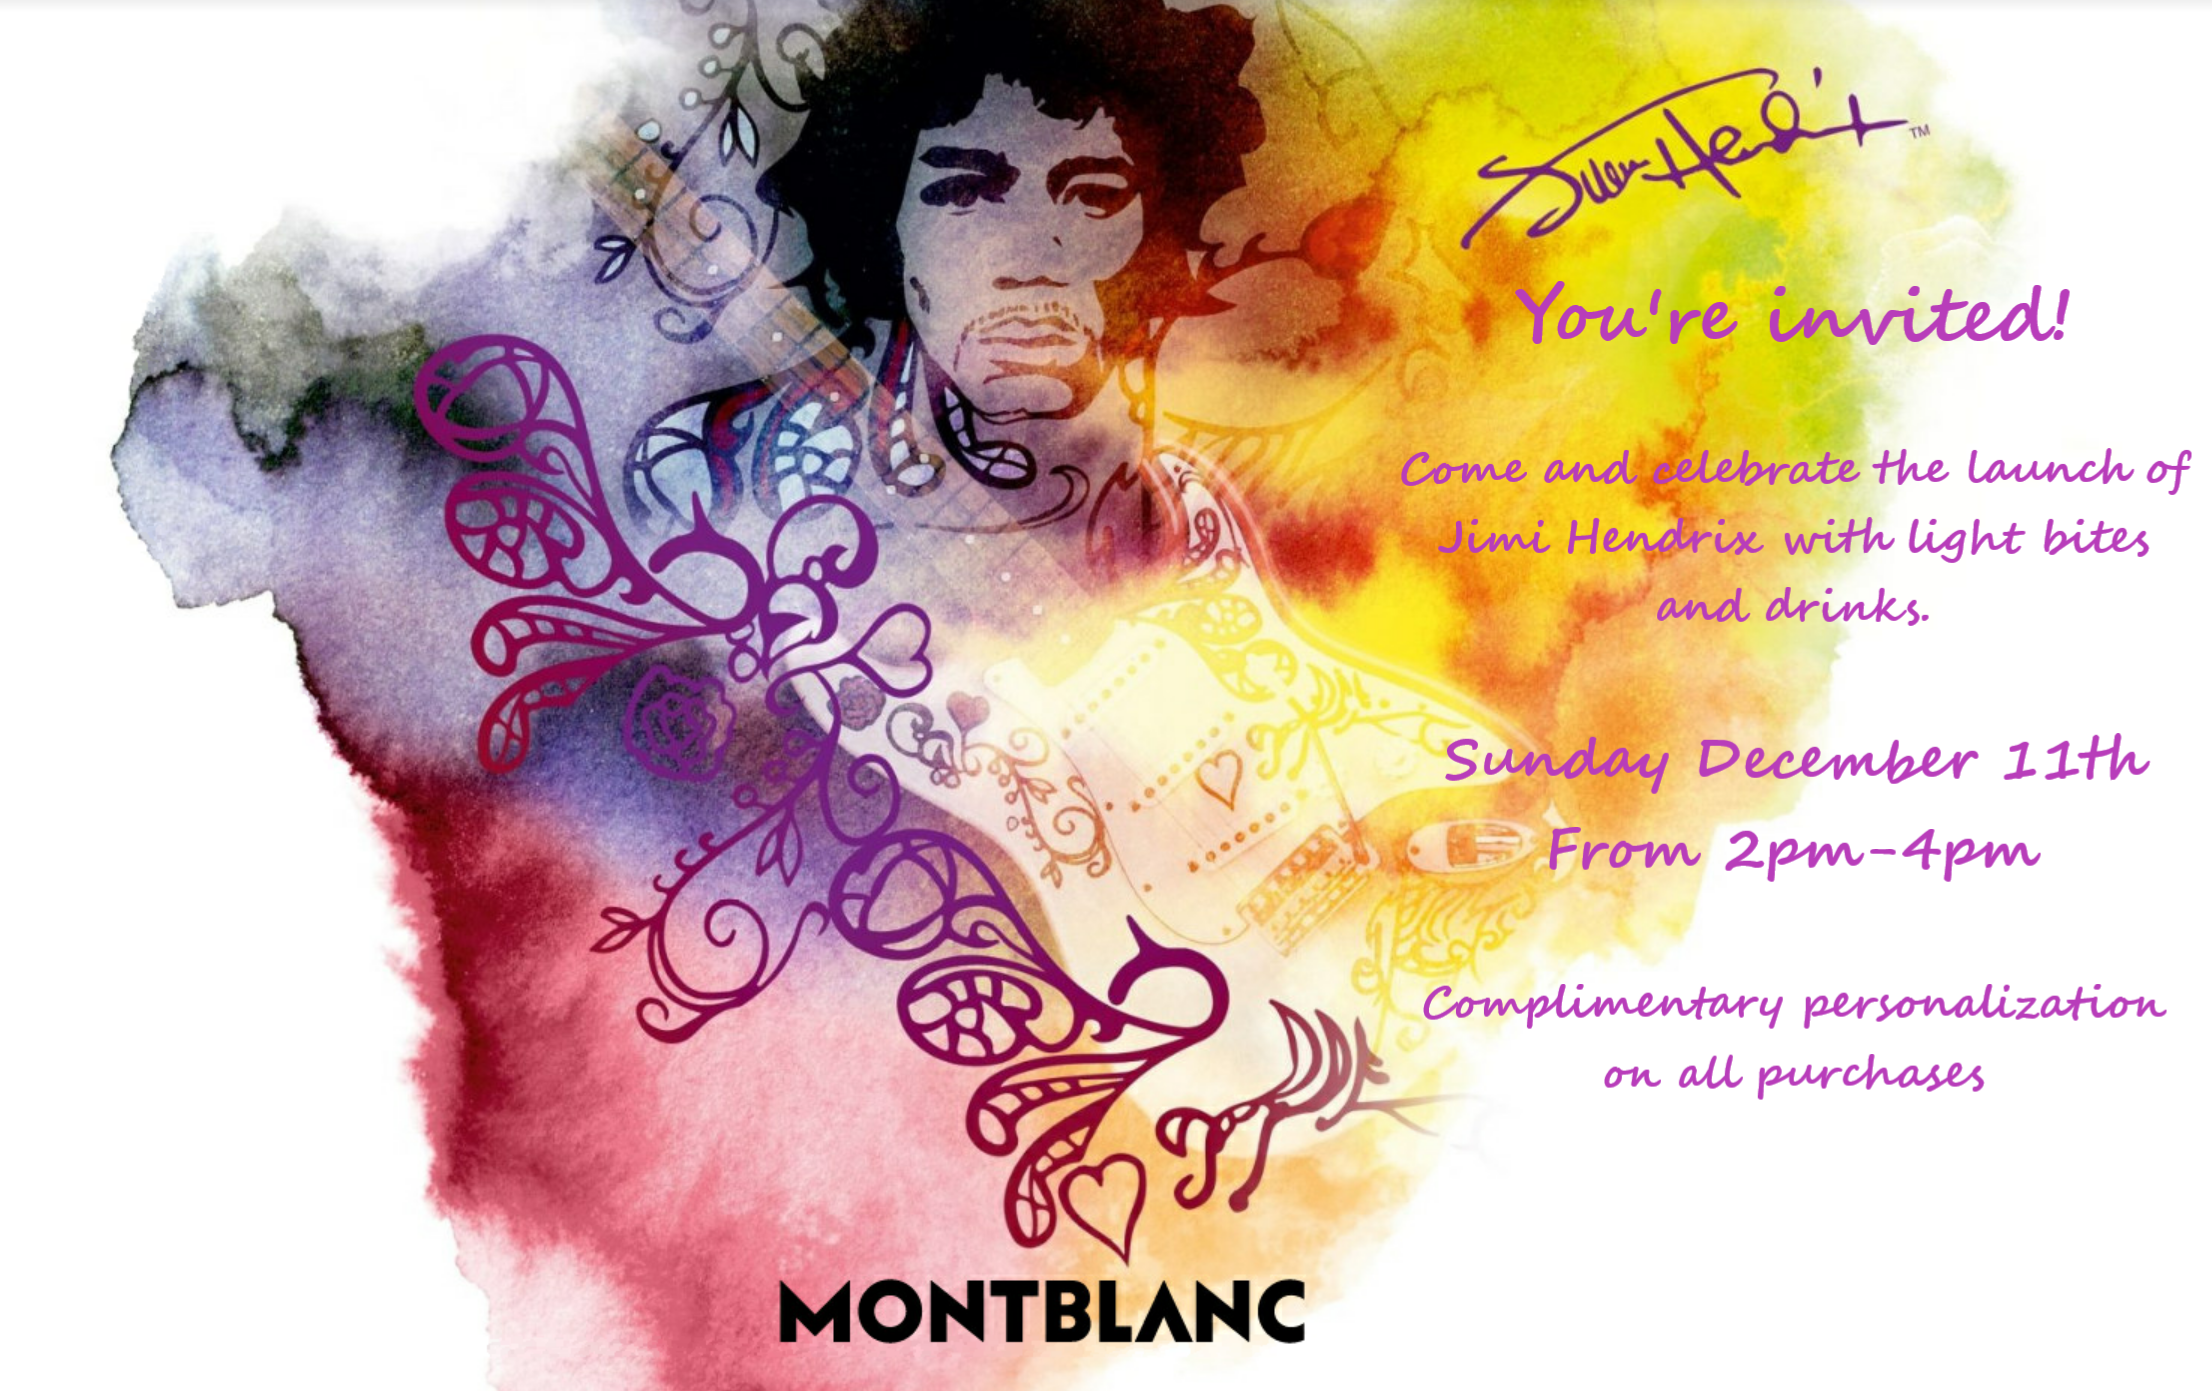 Jimi Hendrix Launch from Montblanc